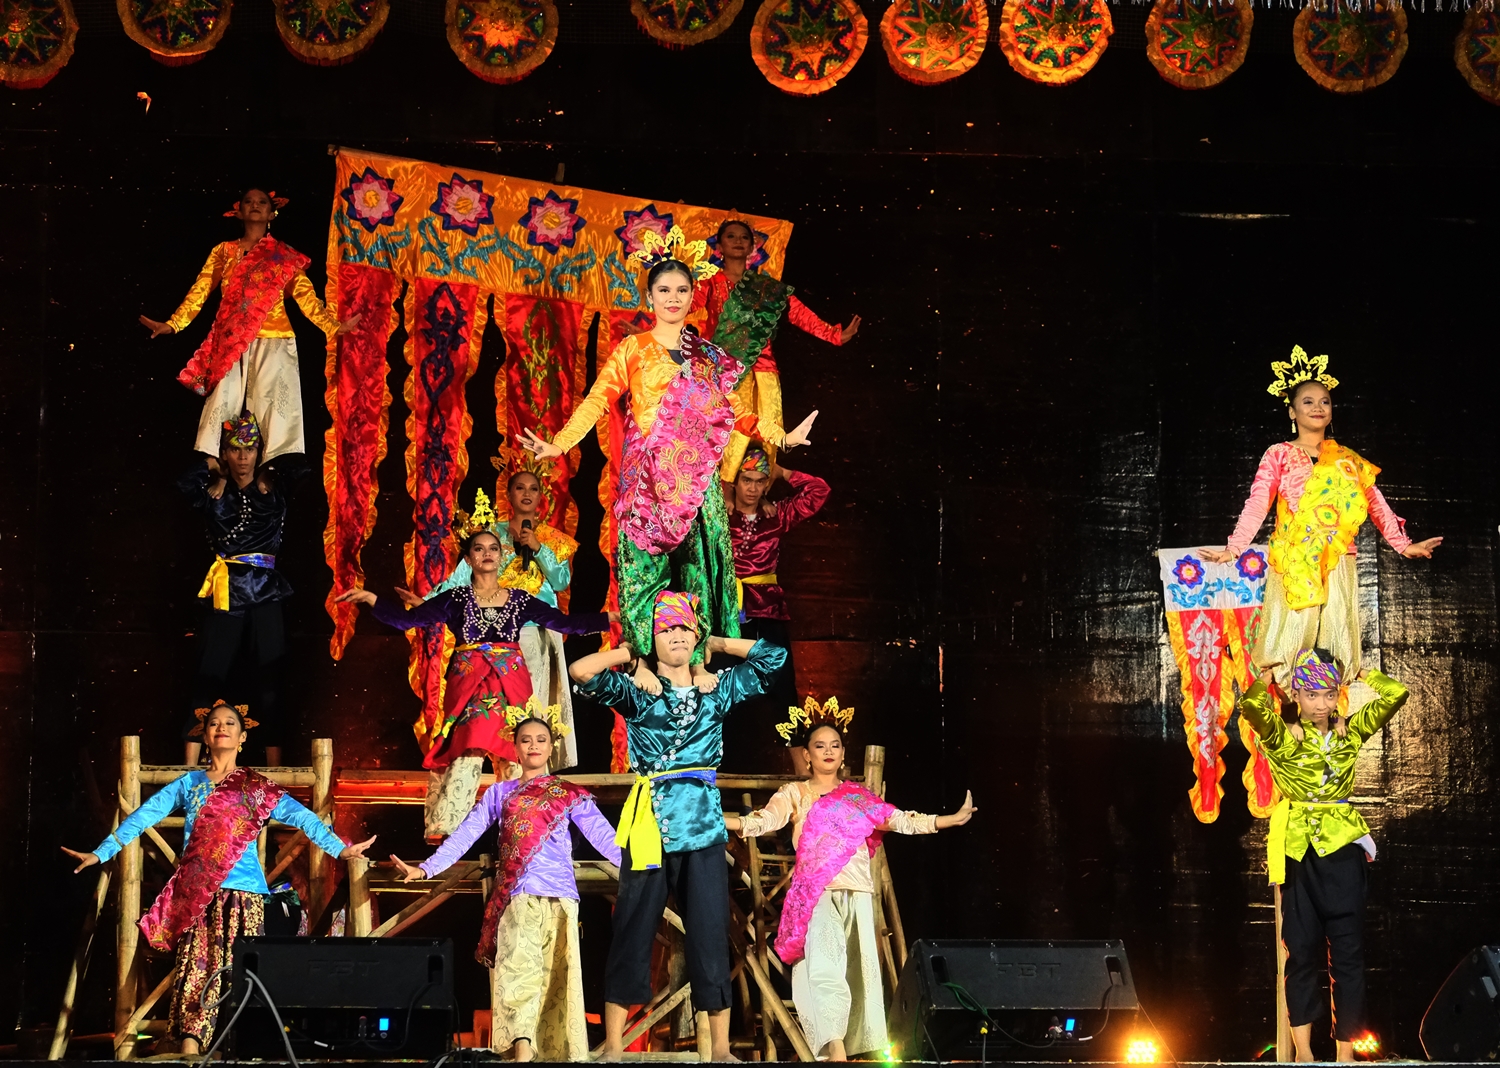 Indak Kudong gather Mindanao's top cultural performing groups in Tacurong City